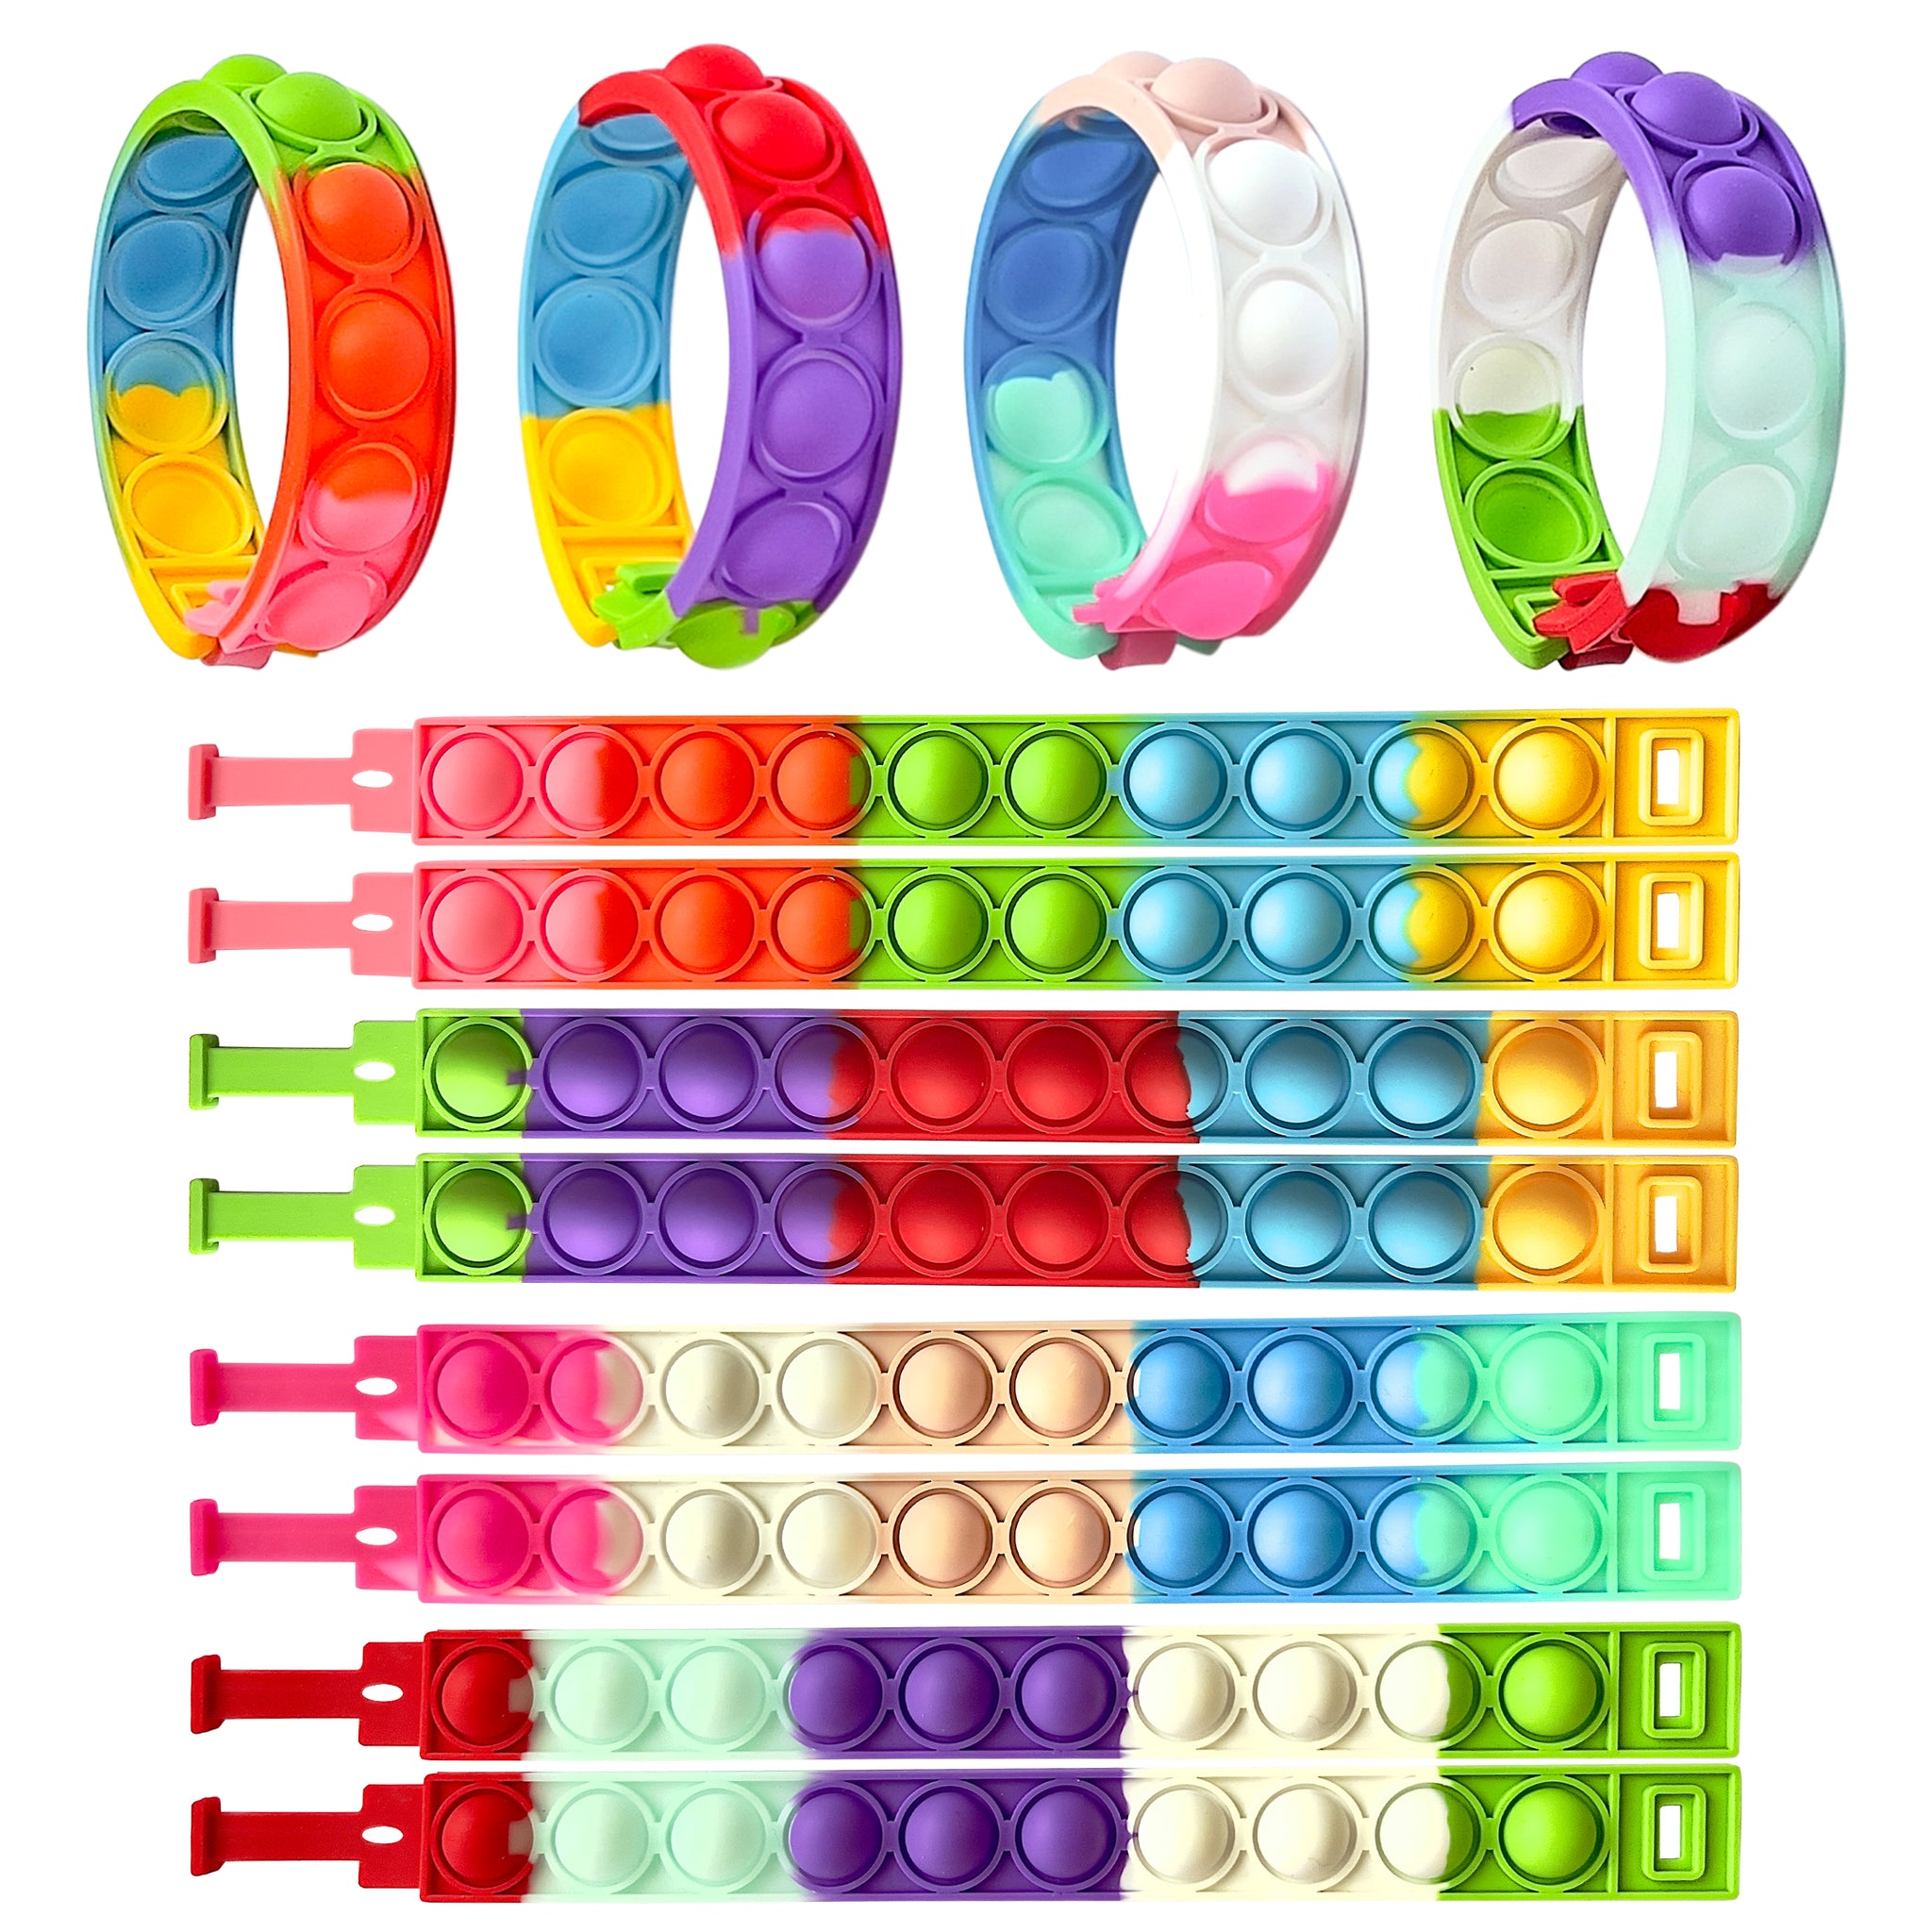 32 PCS Fidget Bracelets Pop it Toy, Glow in The Dark, Rainbow Party Favors, Anti-Anxiety Stress Relief Wristband Set, Push Bubbles Sensory Autistic Pack Kids Ages 5 8 12 Adult Student Gift